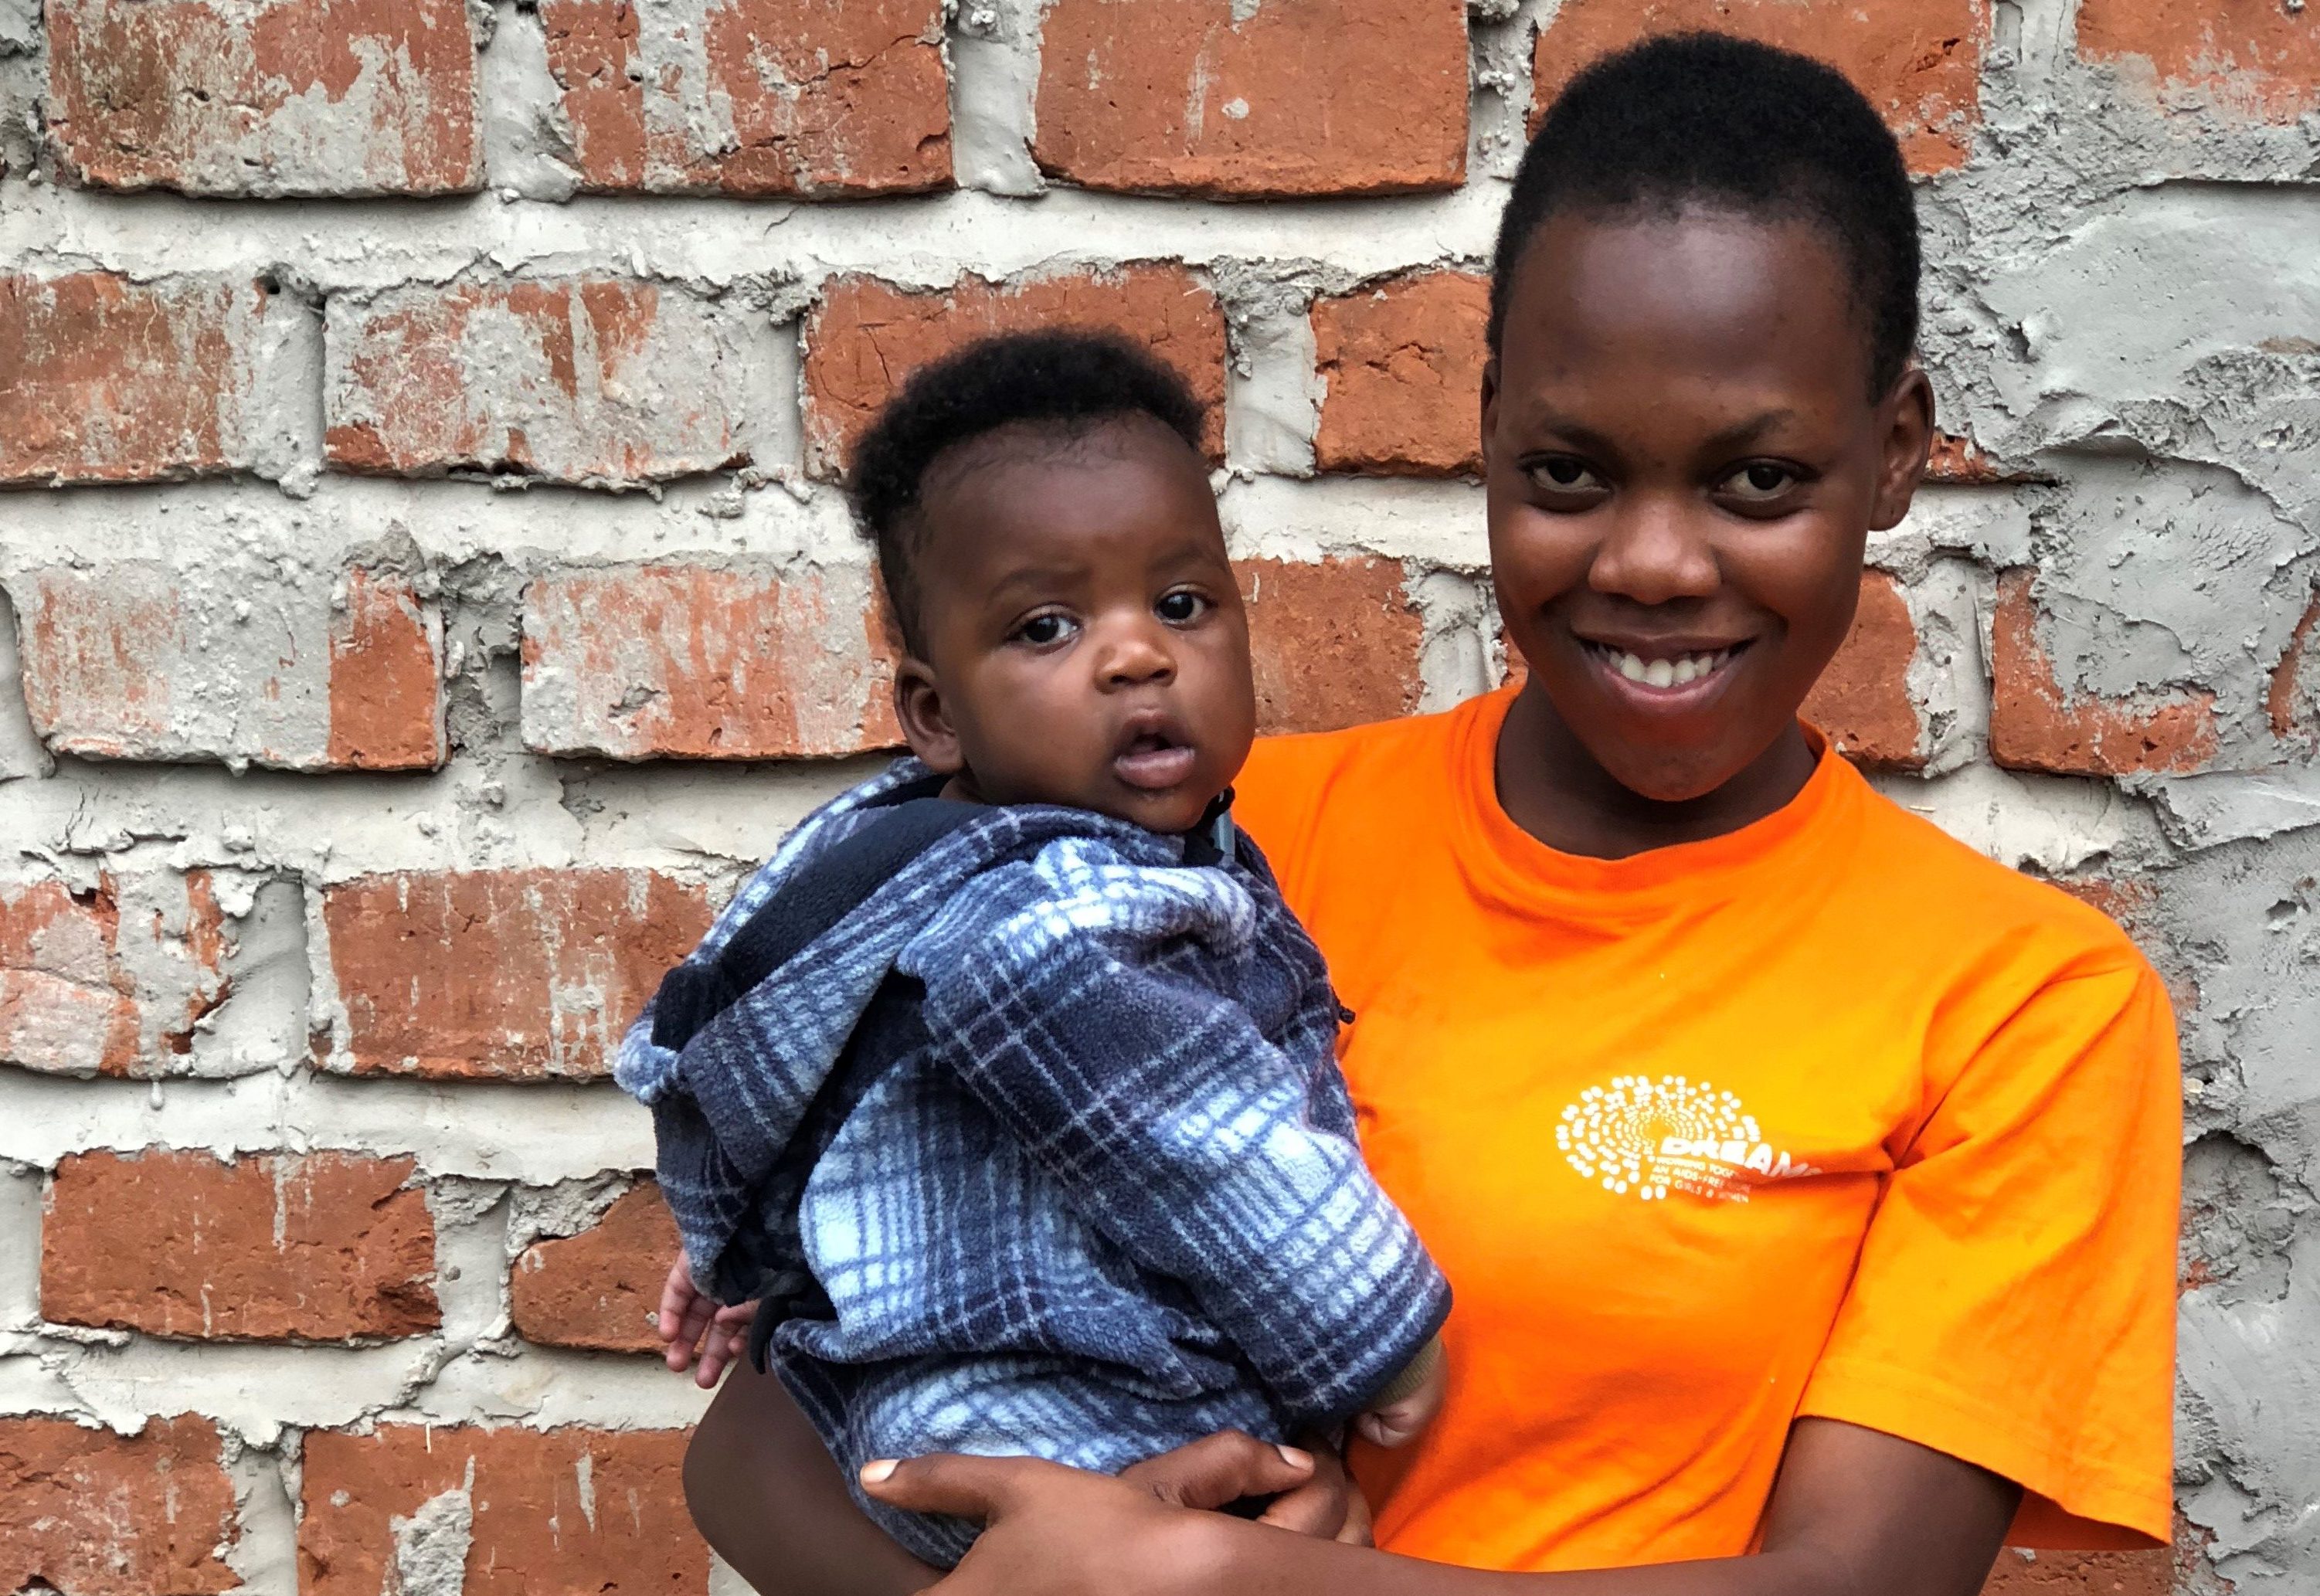 Super mom: One Ugandan girl defies the odds to stay in school